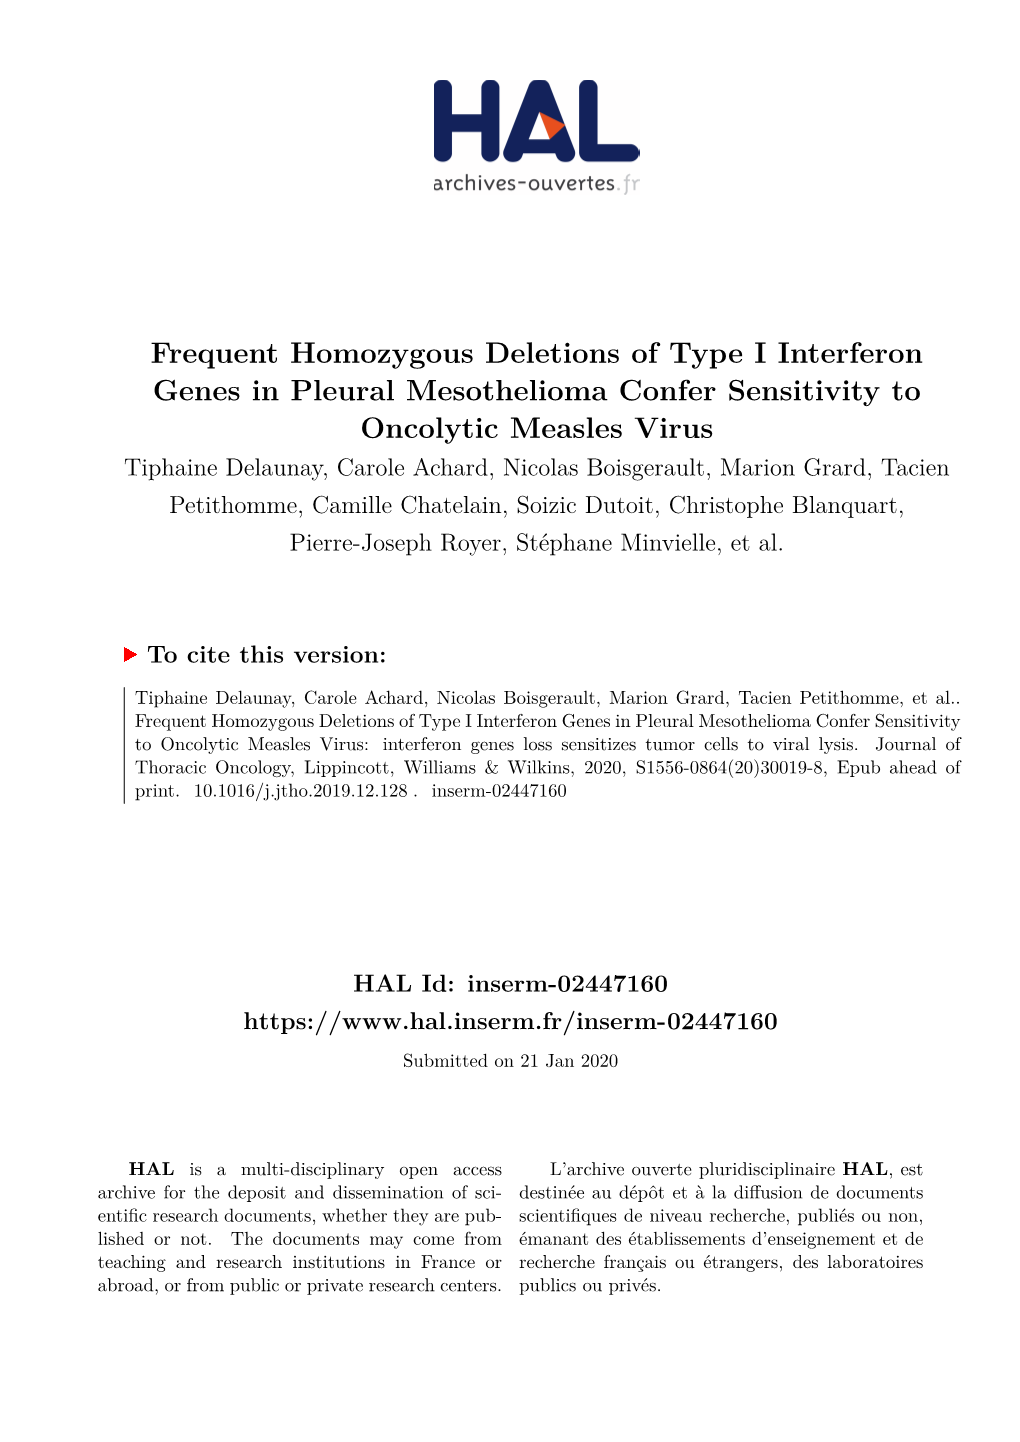 Frequent Homozygous Deletions of Type I Interferon Genes in Pleural